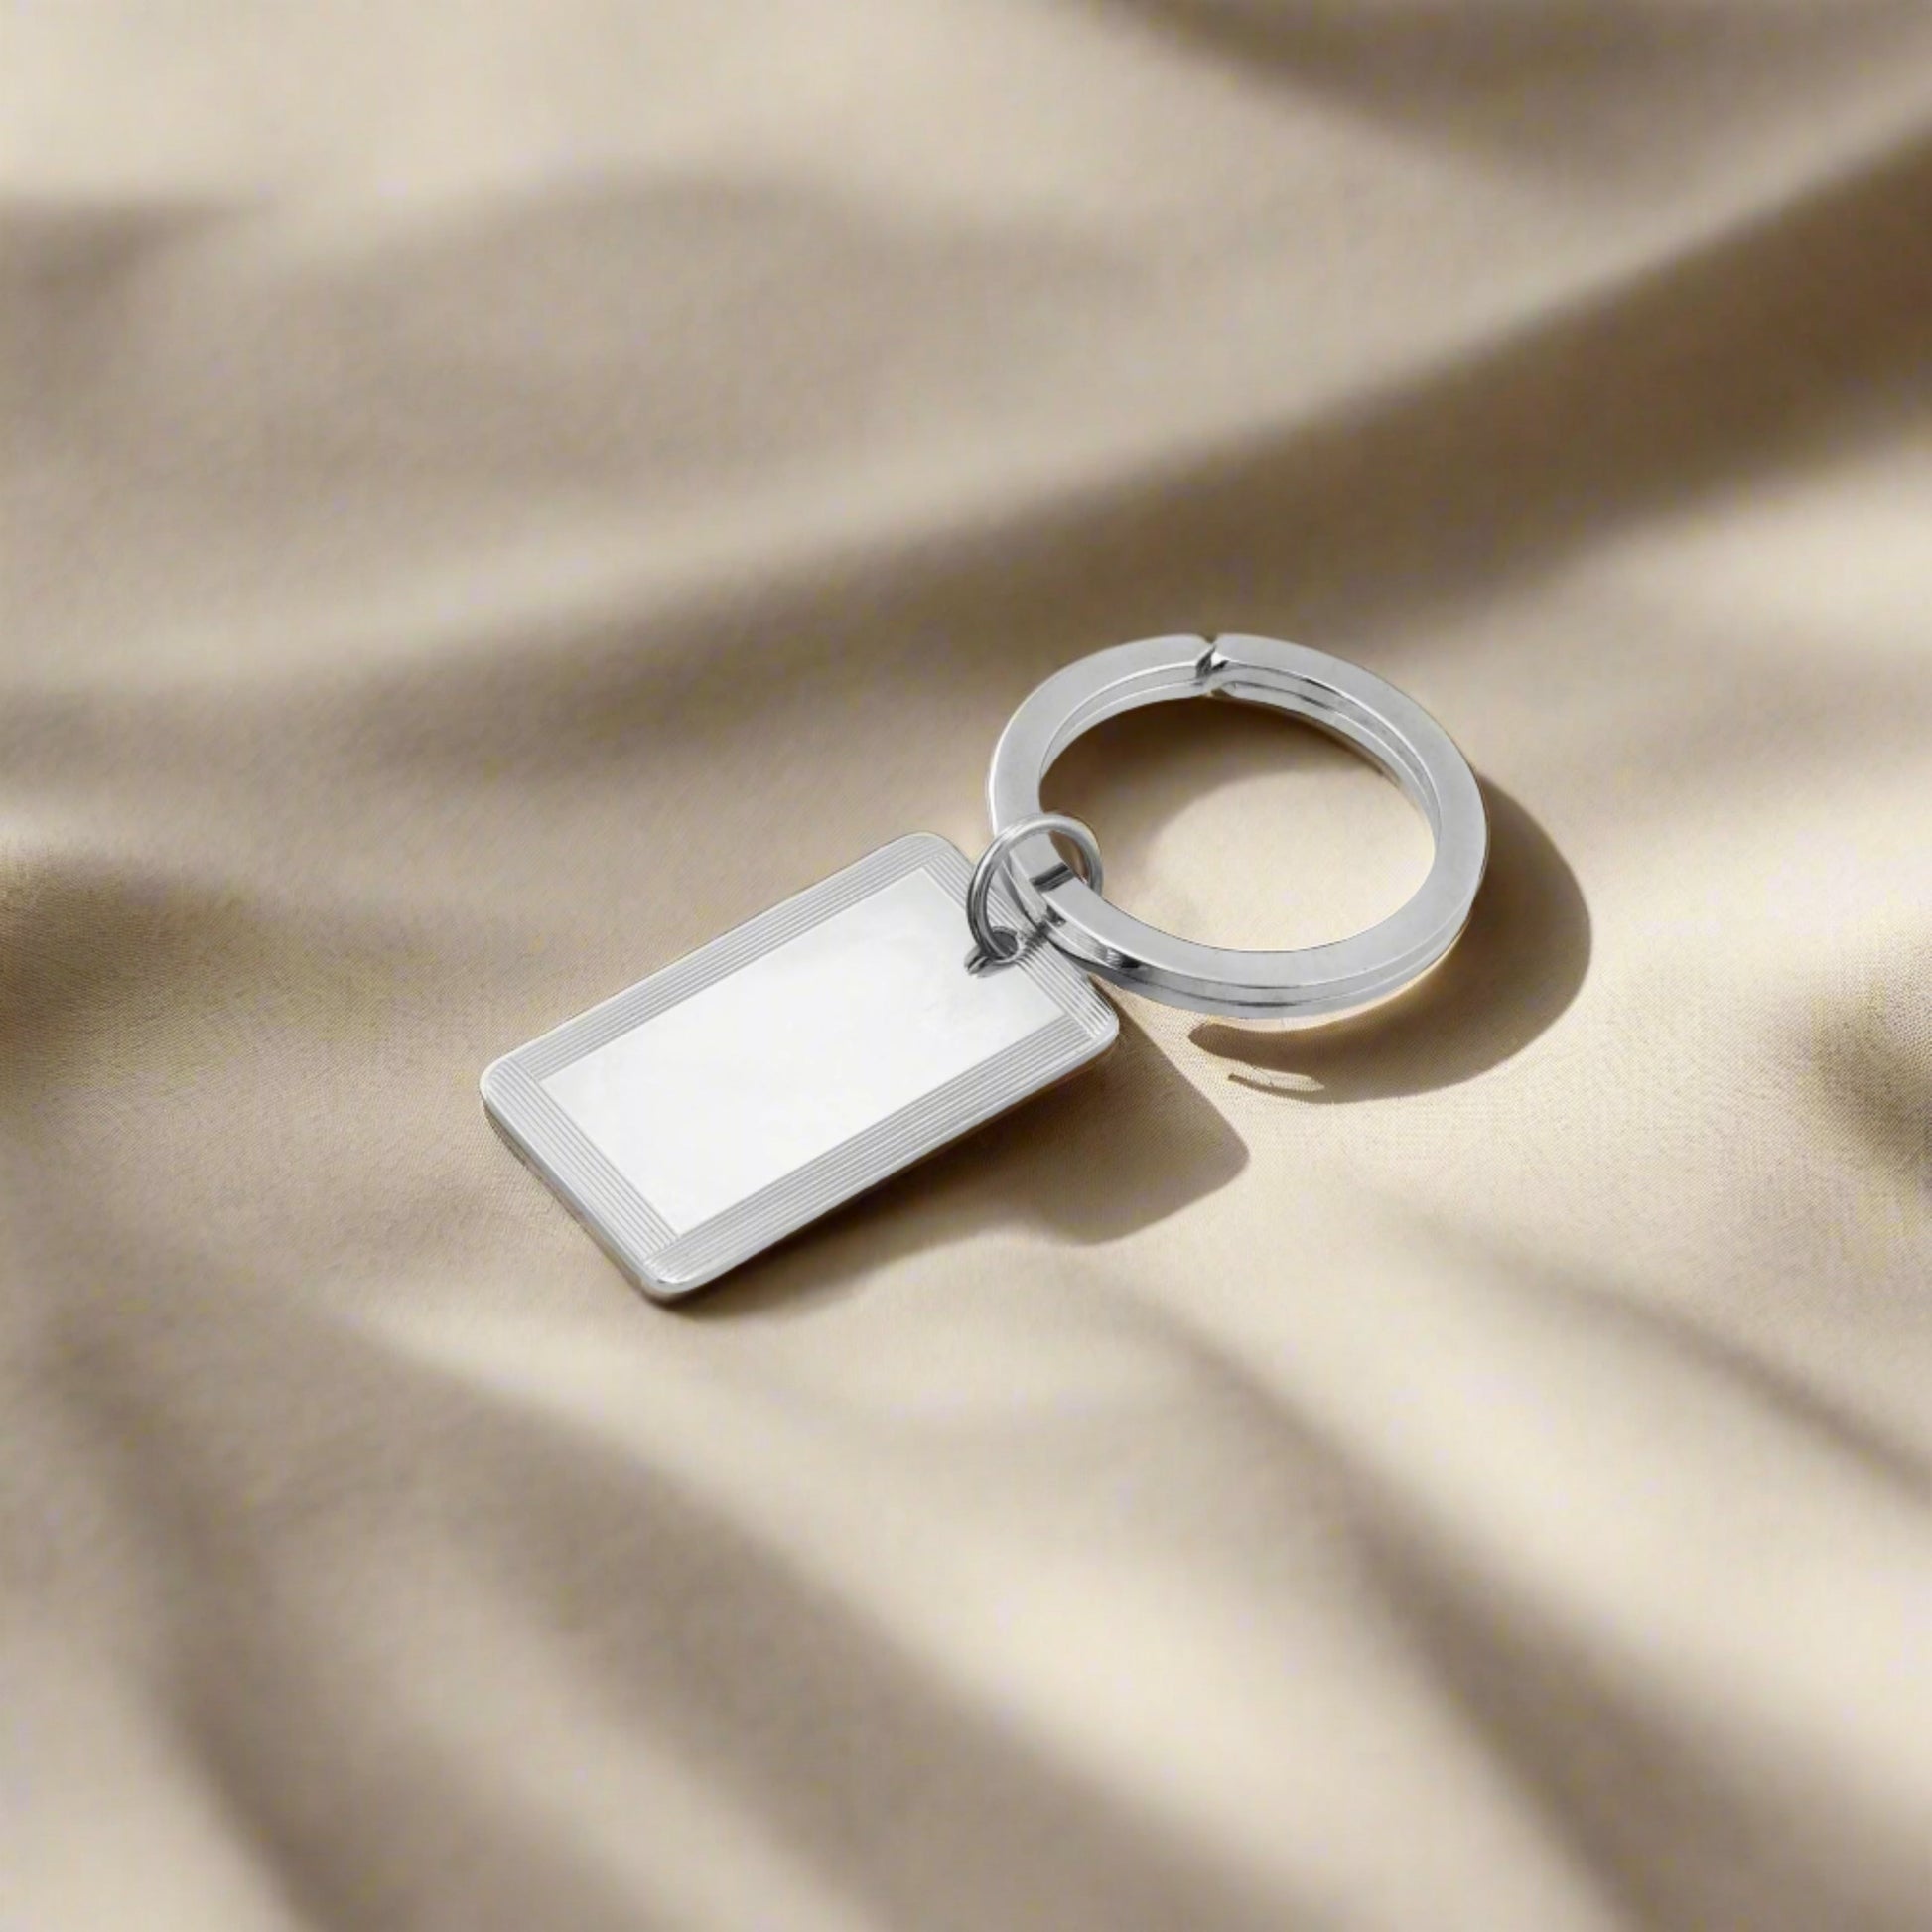 Sterling Silver Rectangular Key Ring with Four Line Frame